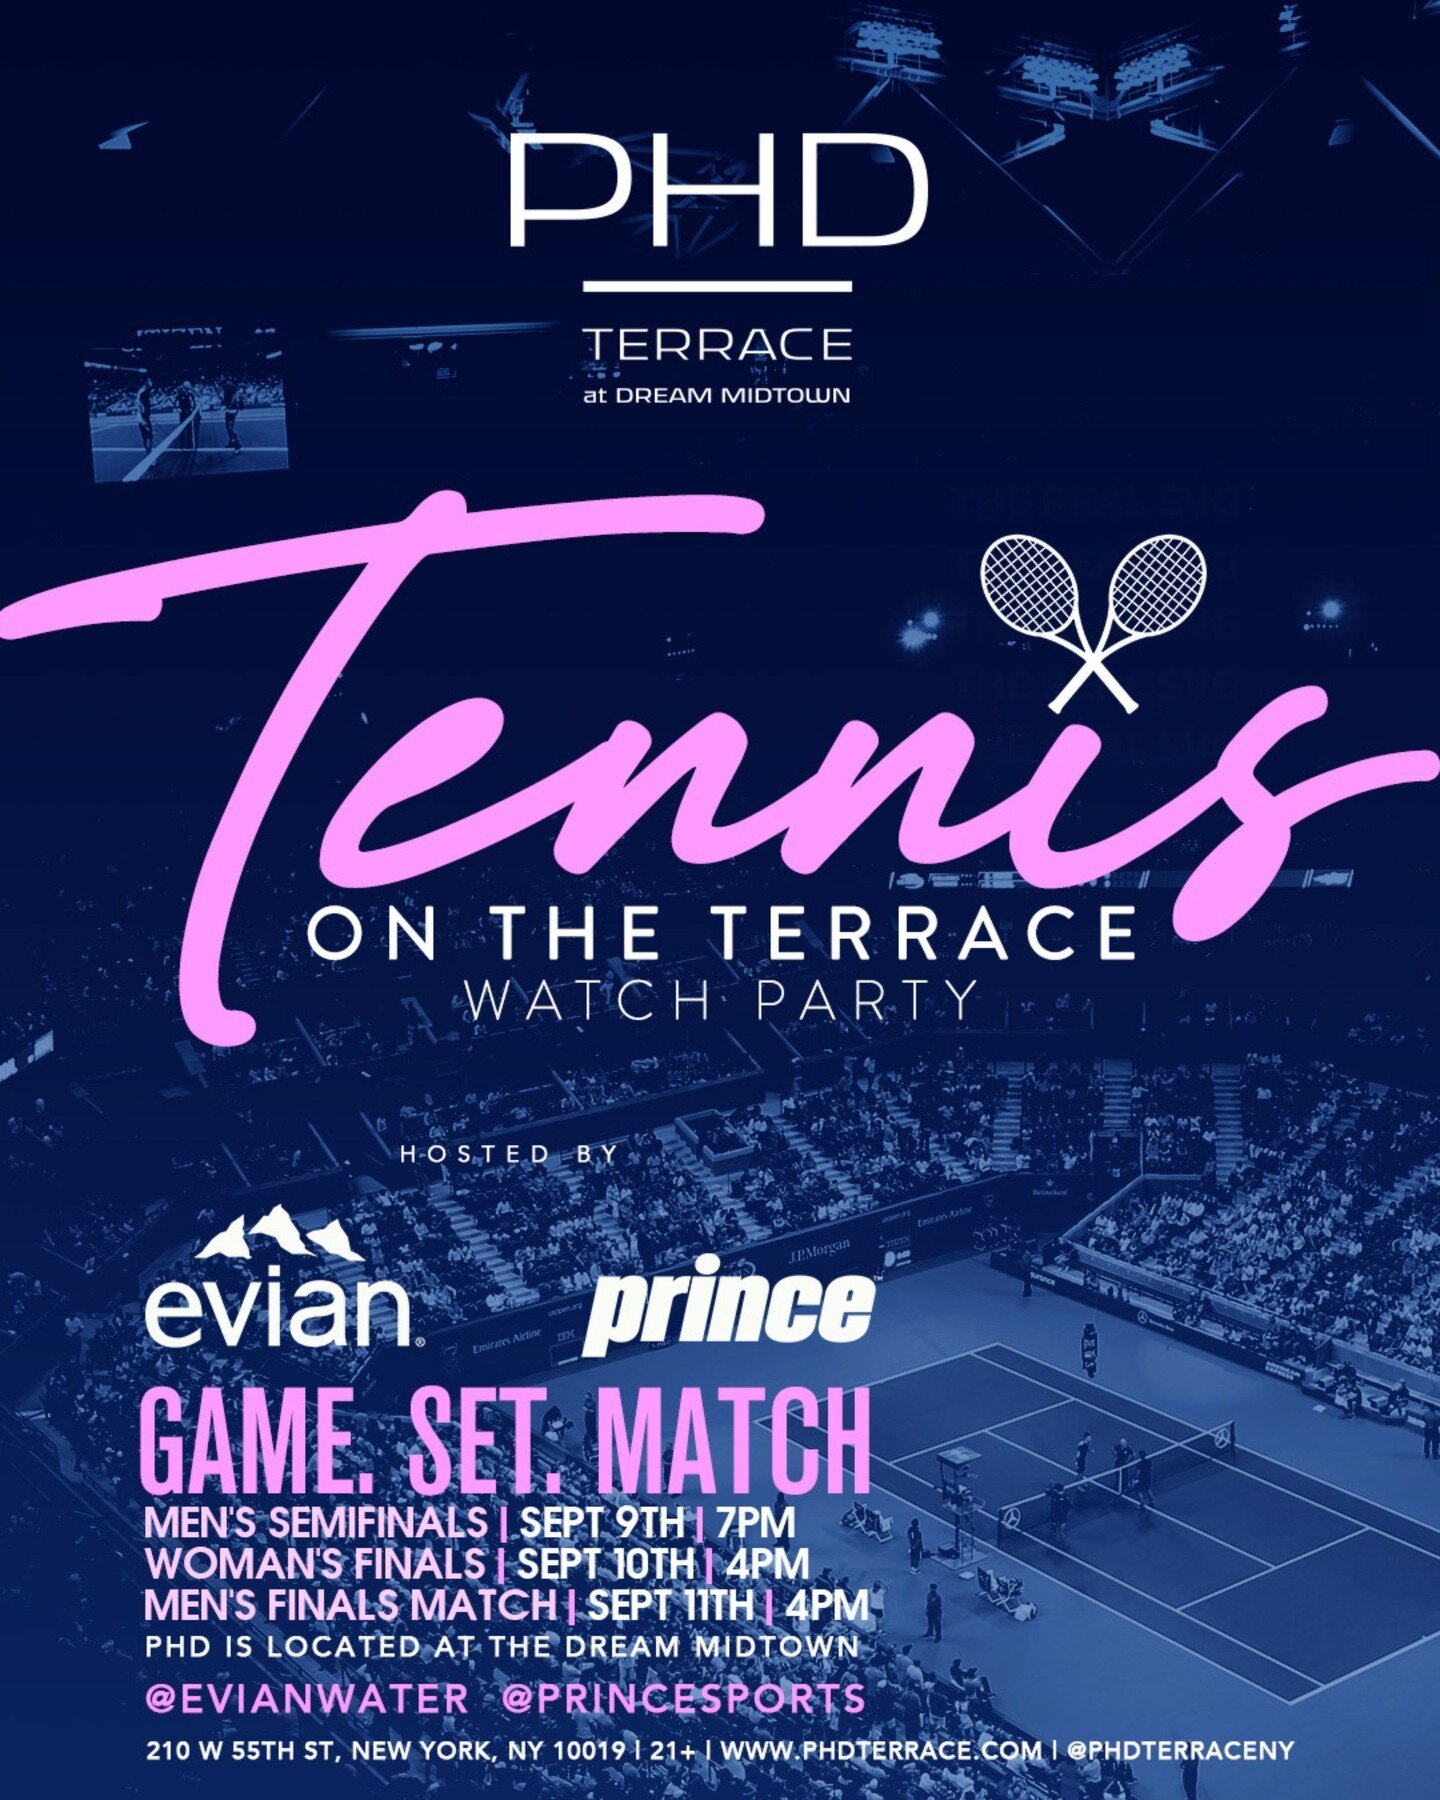 We&rsquo;re teaming up with @evianwater and @phdterraceny to host a special &ldquo;Tennis on the Terrace&rdquo; watch party for the Tennis Championships this weekend. Join us from September 9th &ndash; 11th at PHD Terrace at the Dream Midtown hotel i